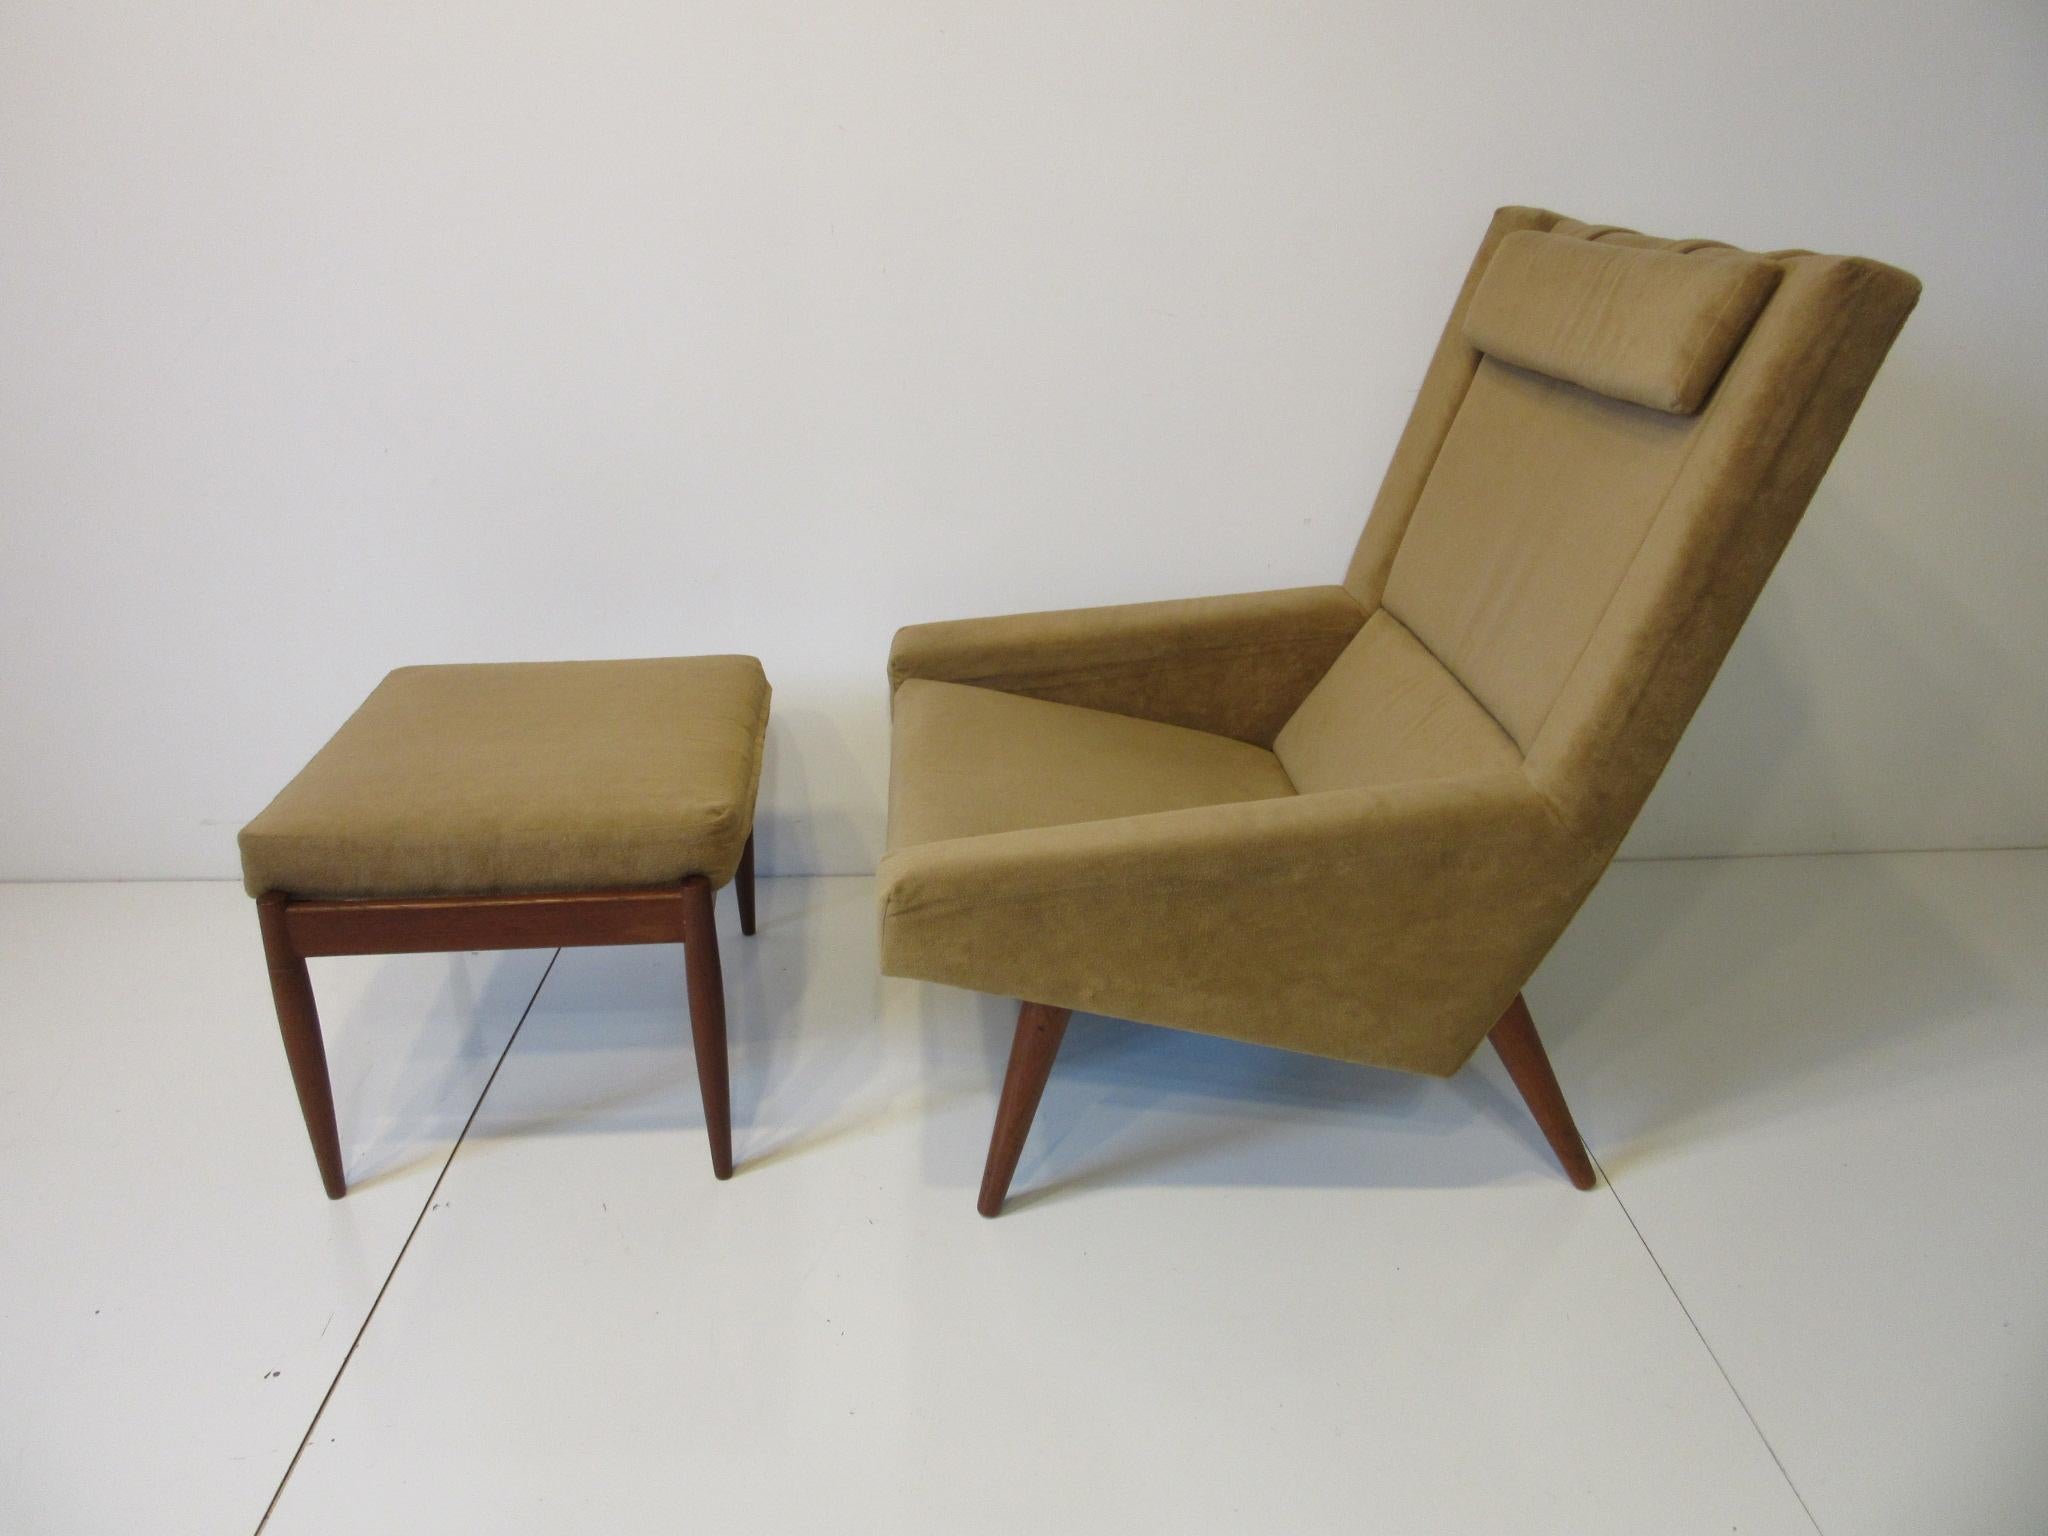 A soft and comfortable taupe colored lounge chair and ottoman with darker solid conical teak legs and matching headrest. Ergonomically designed and having the best of the great handcrafted work of the early Danish Modernists. This piece was lovingly